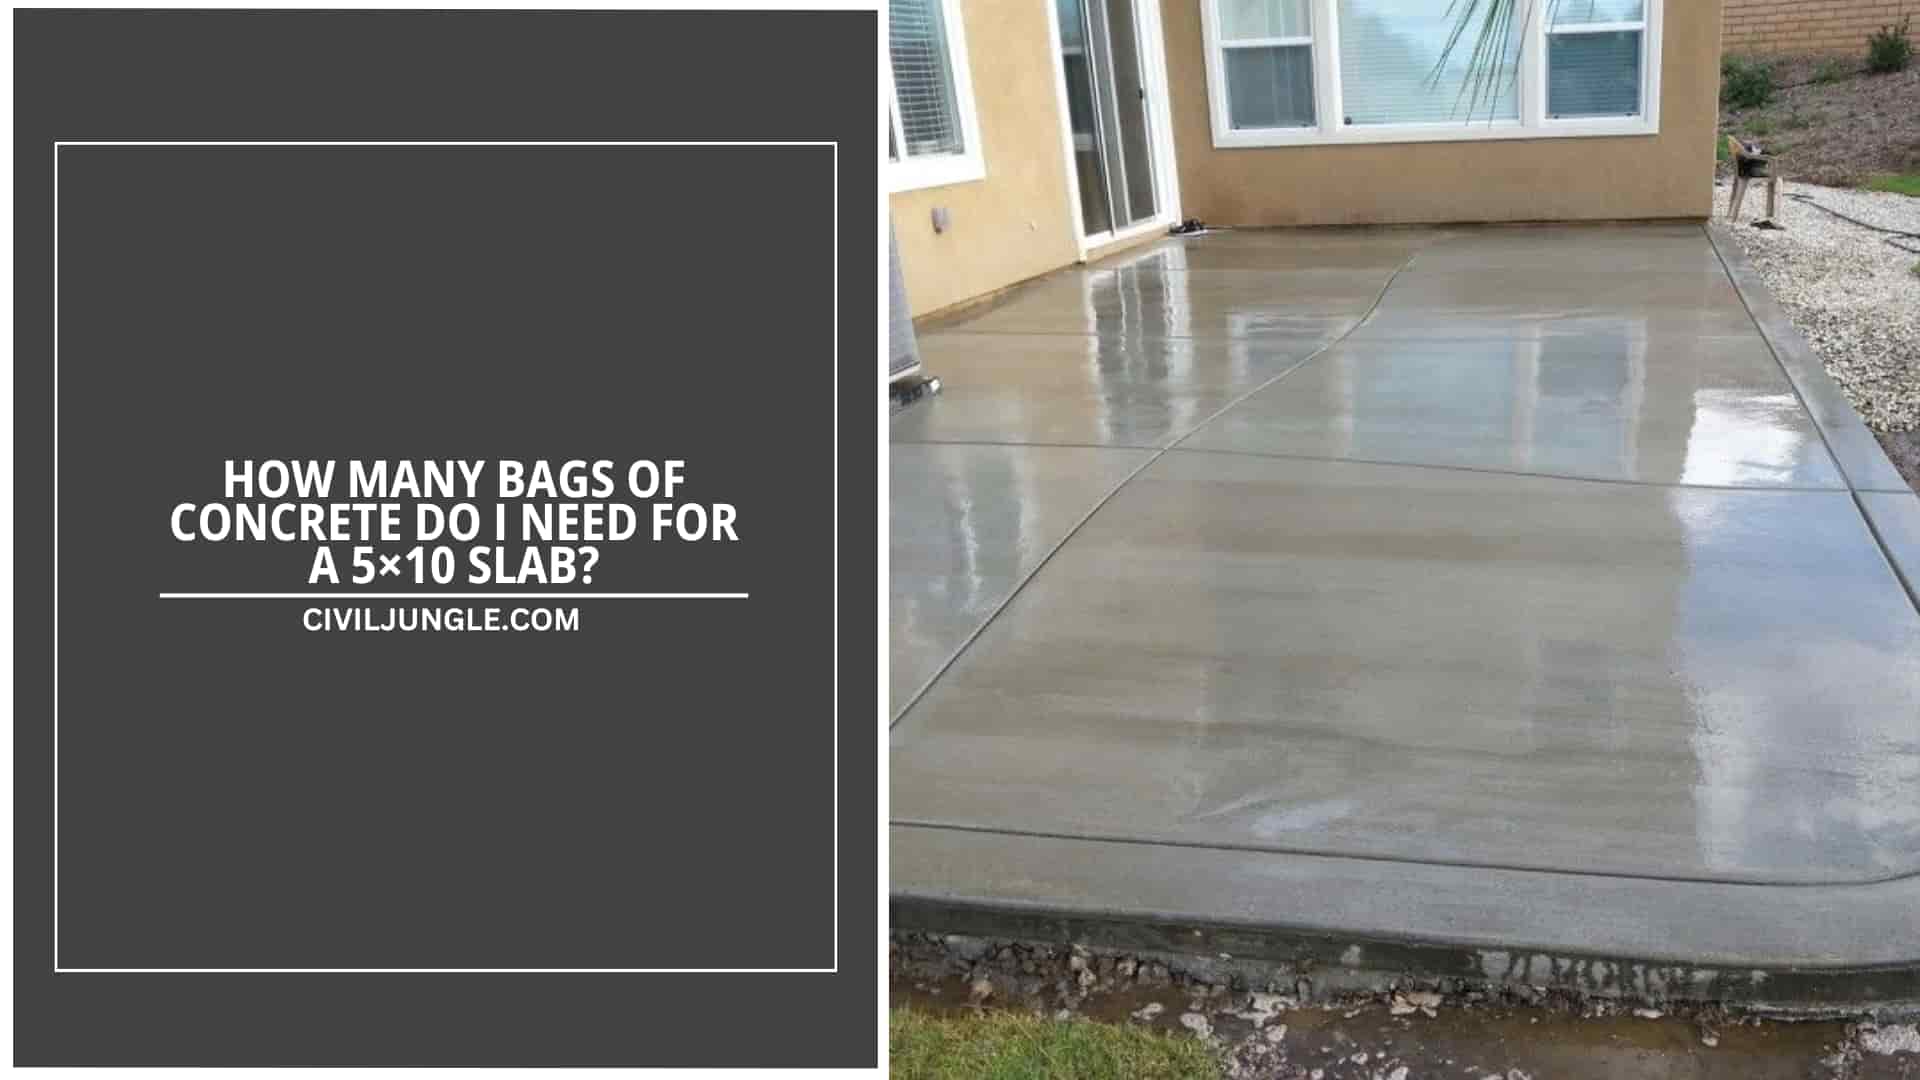 How Many Bags of Concrete Do I Need for a 5×10 Slab?